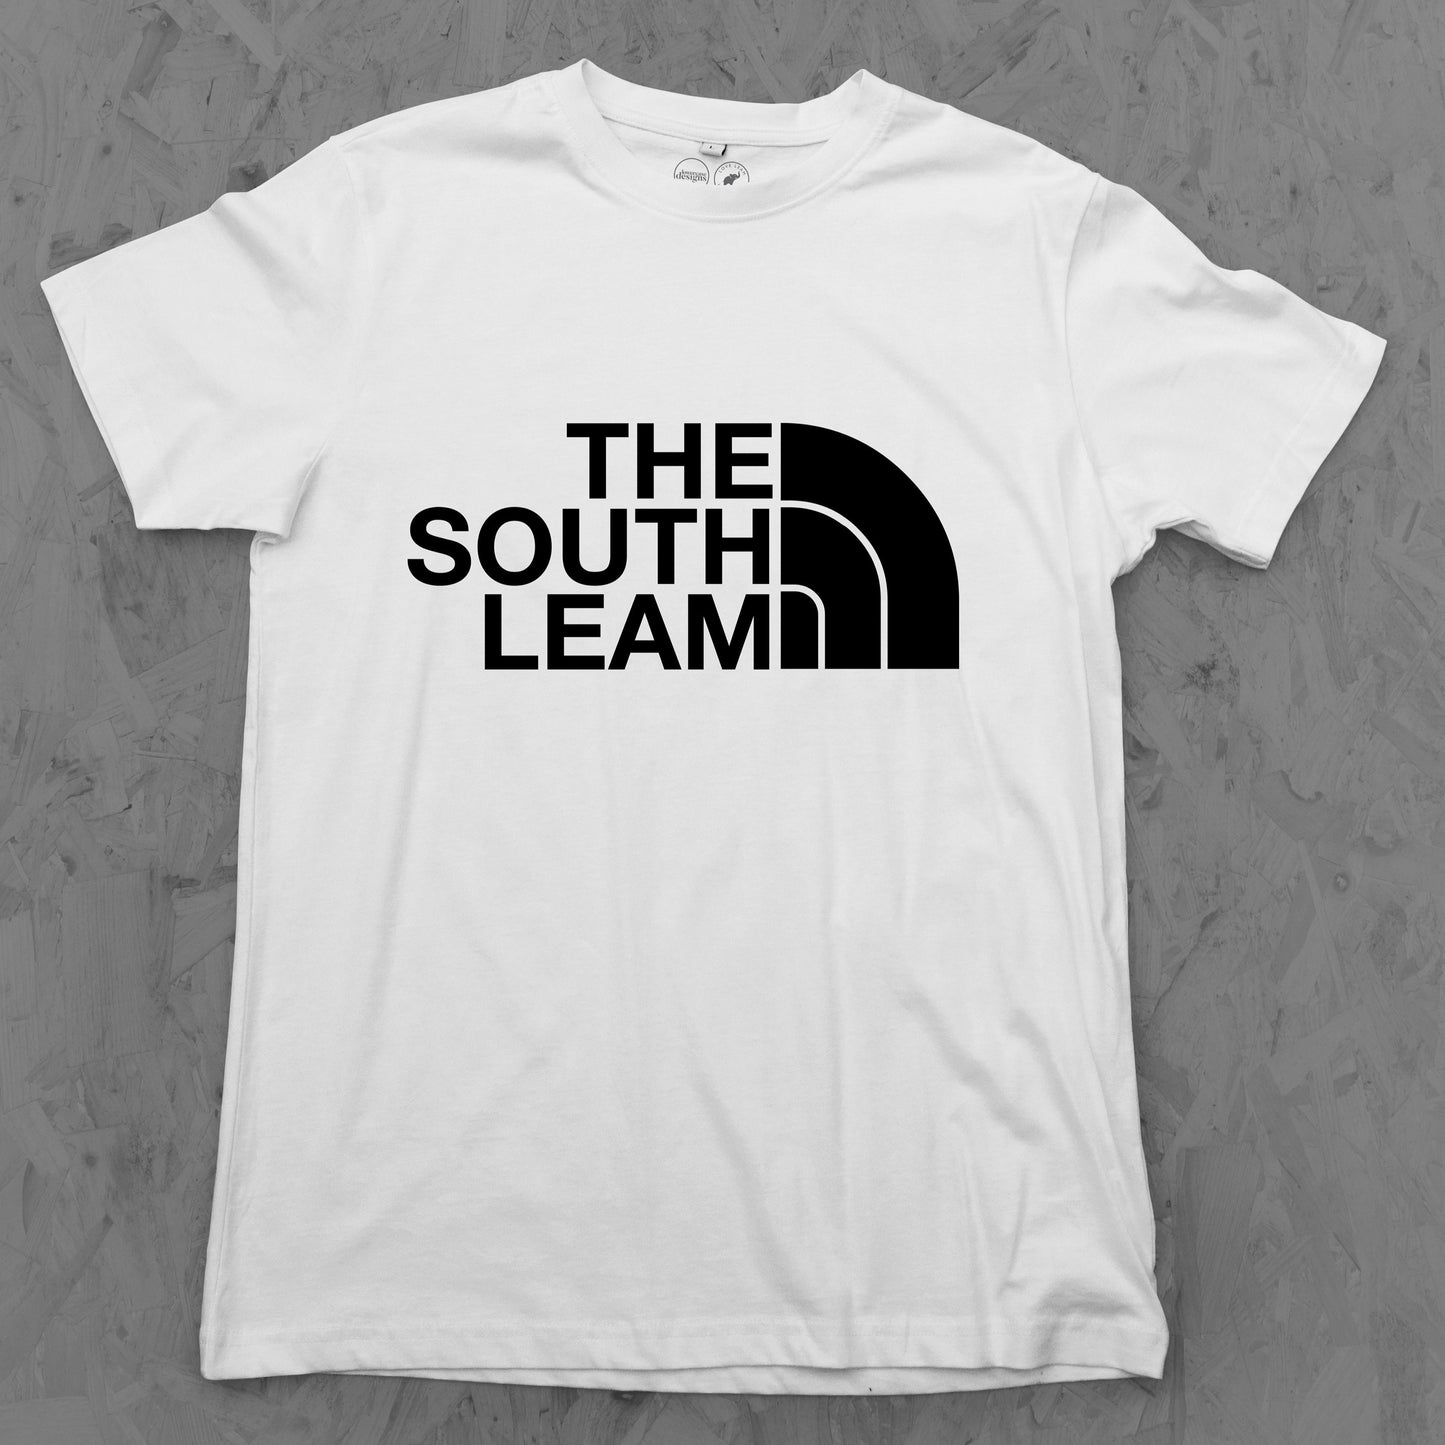 The South Leam Tee